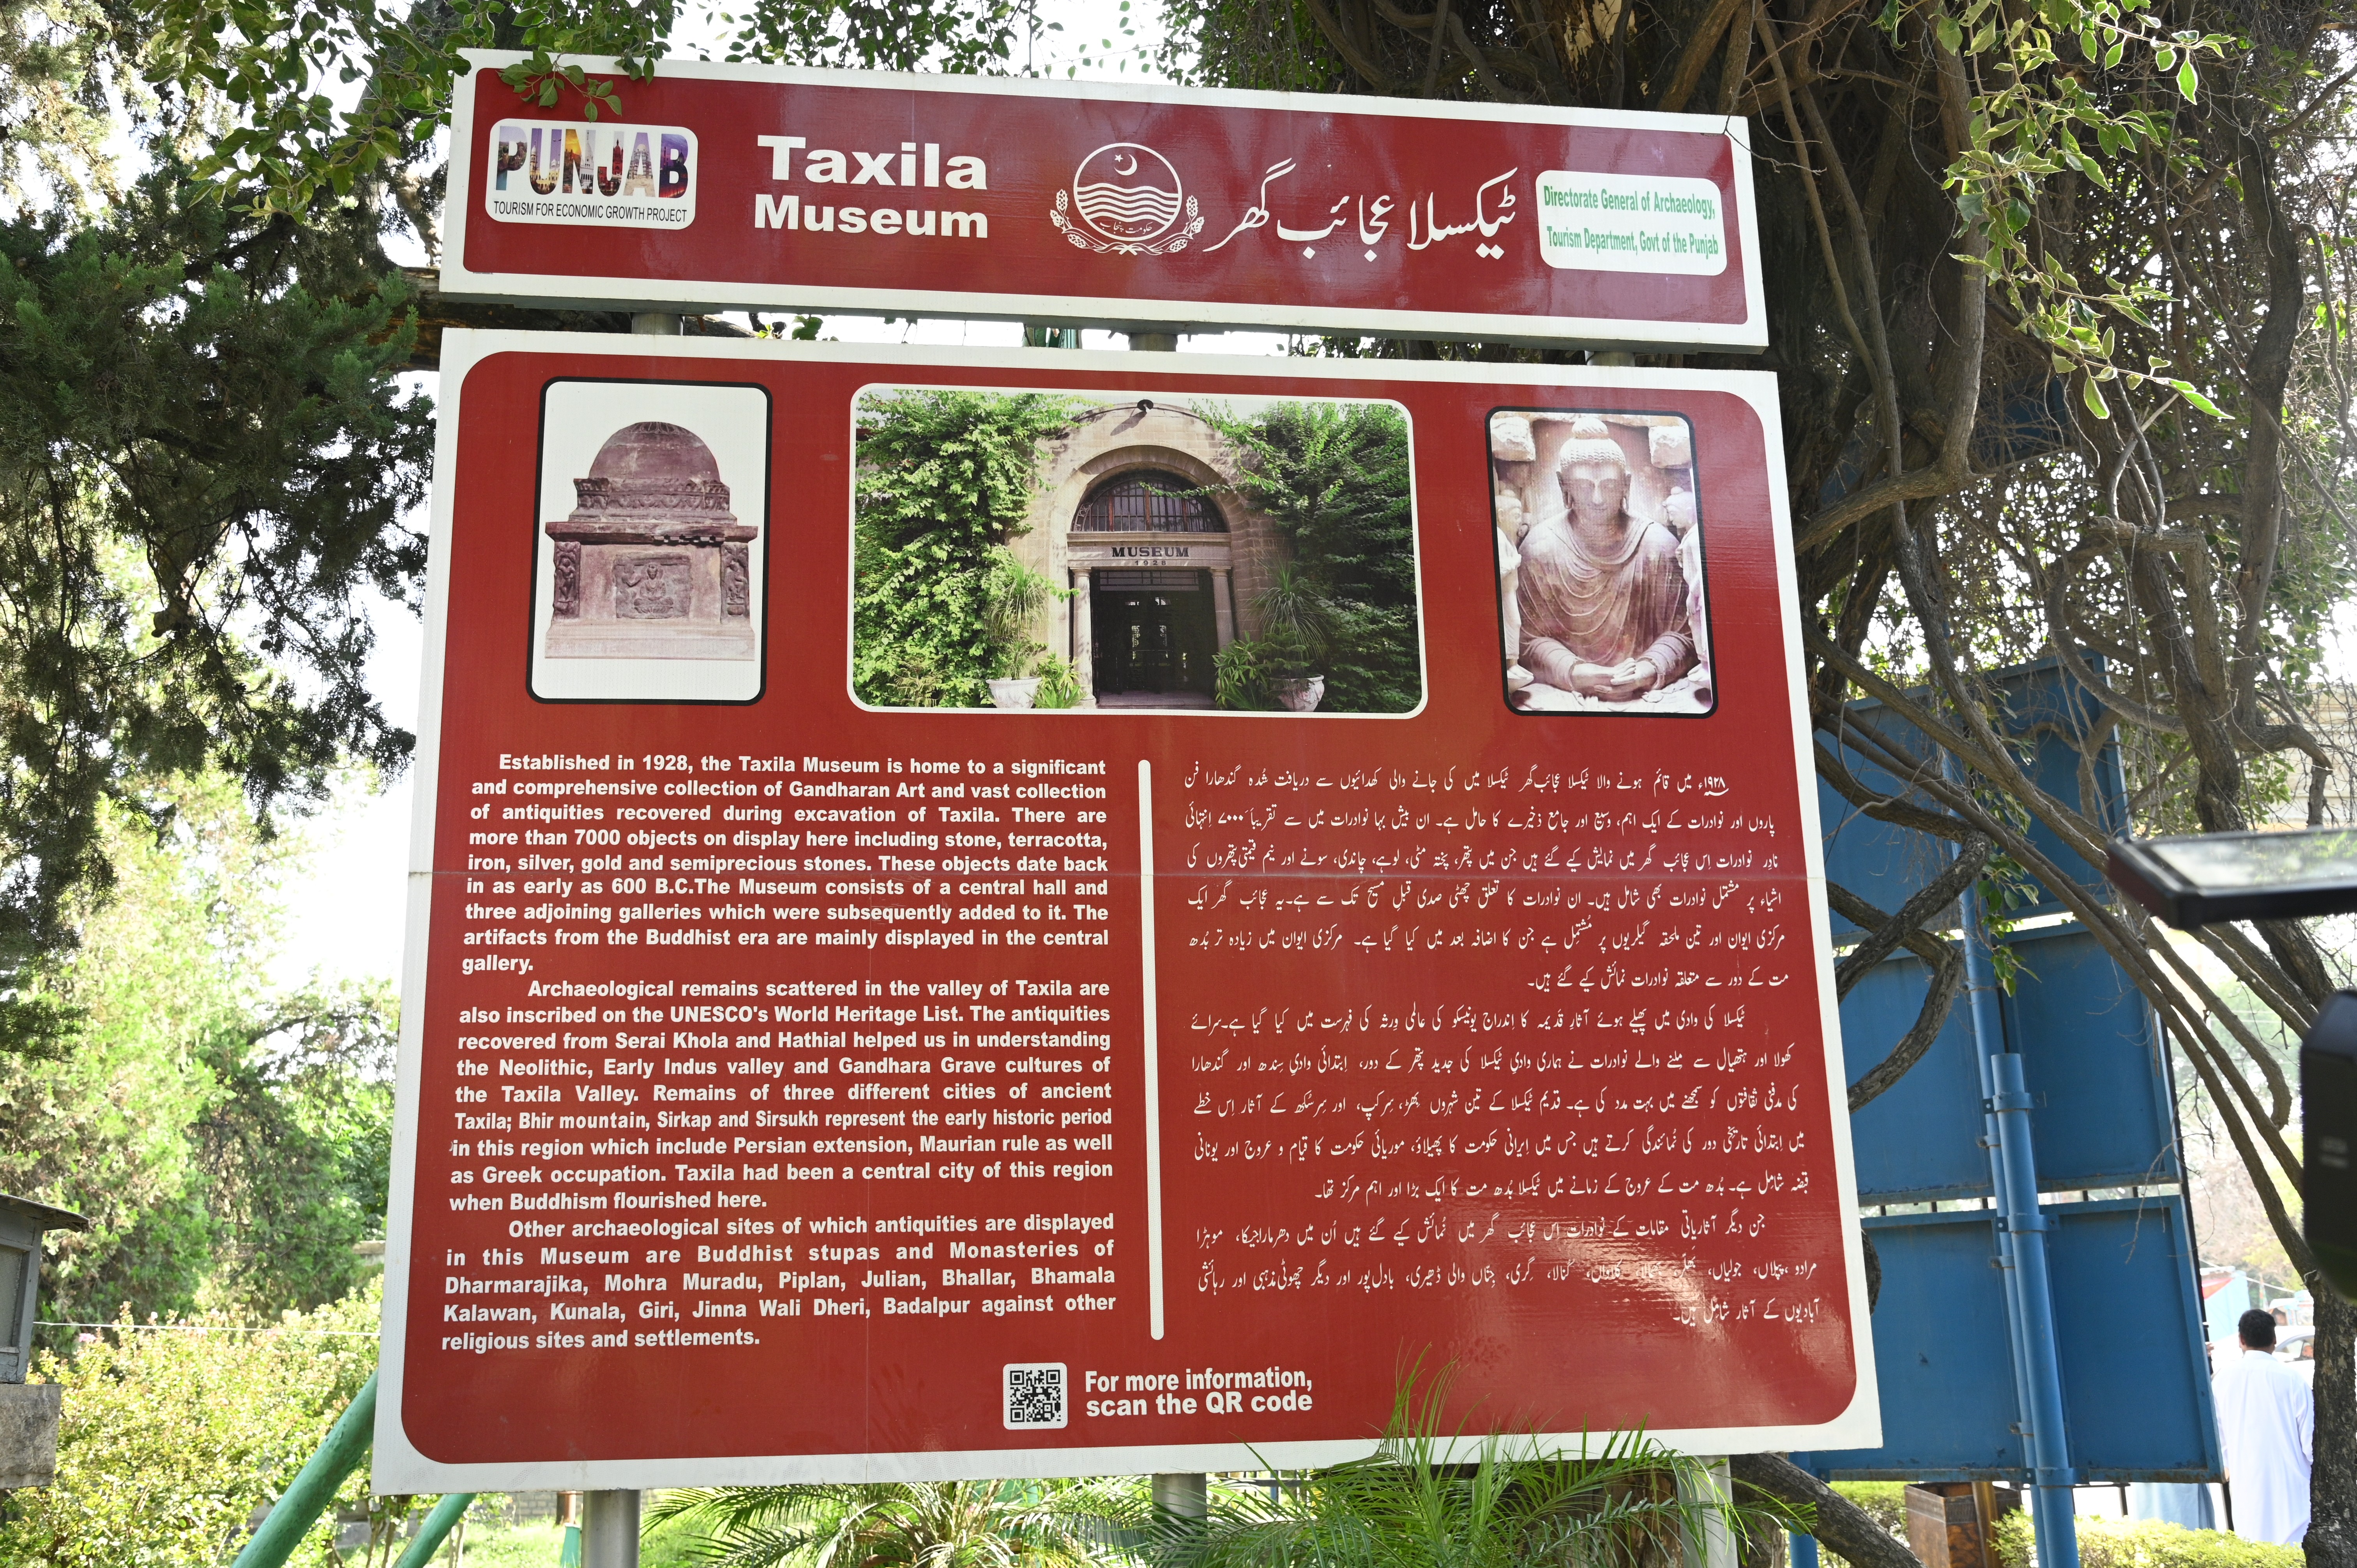 A board showing the history and background of Taxila museum